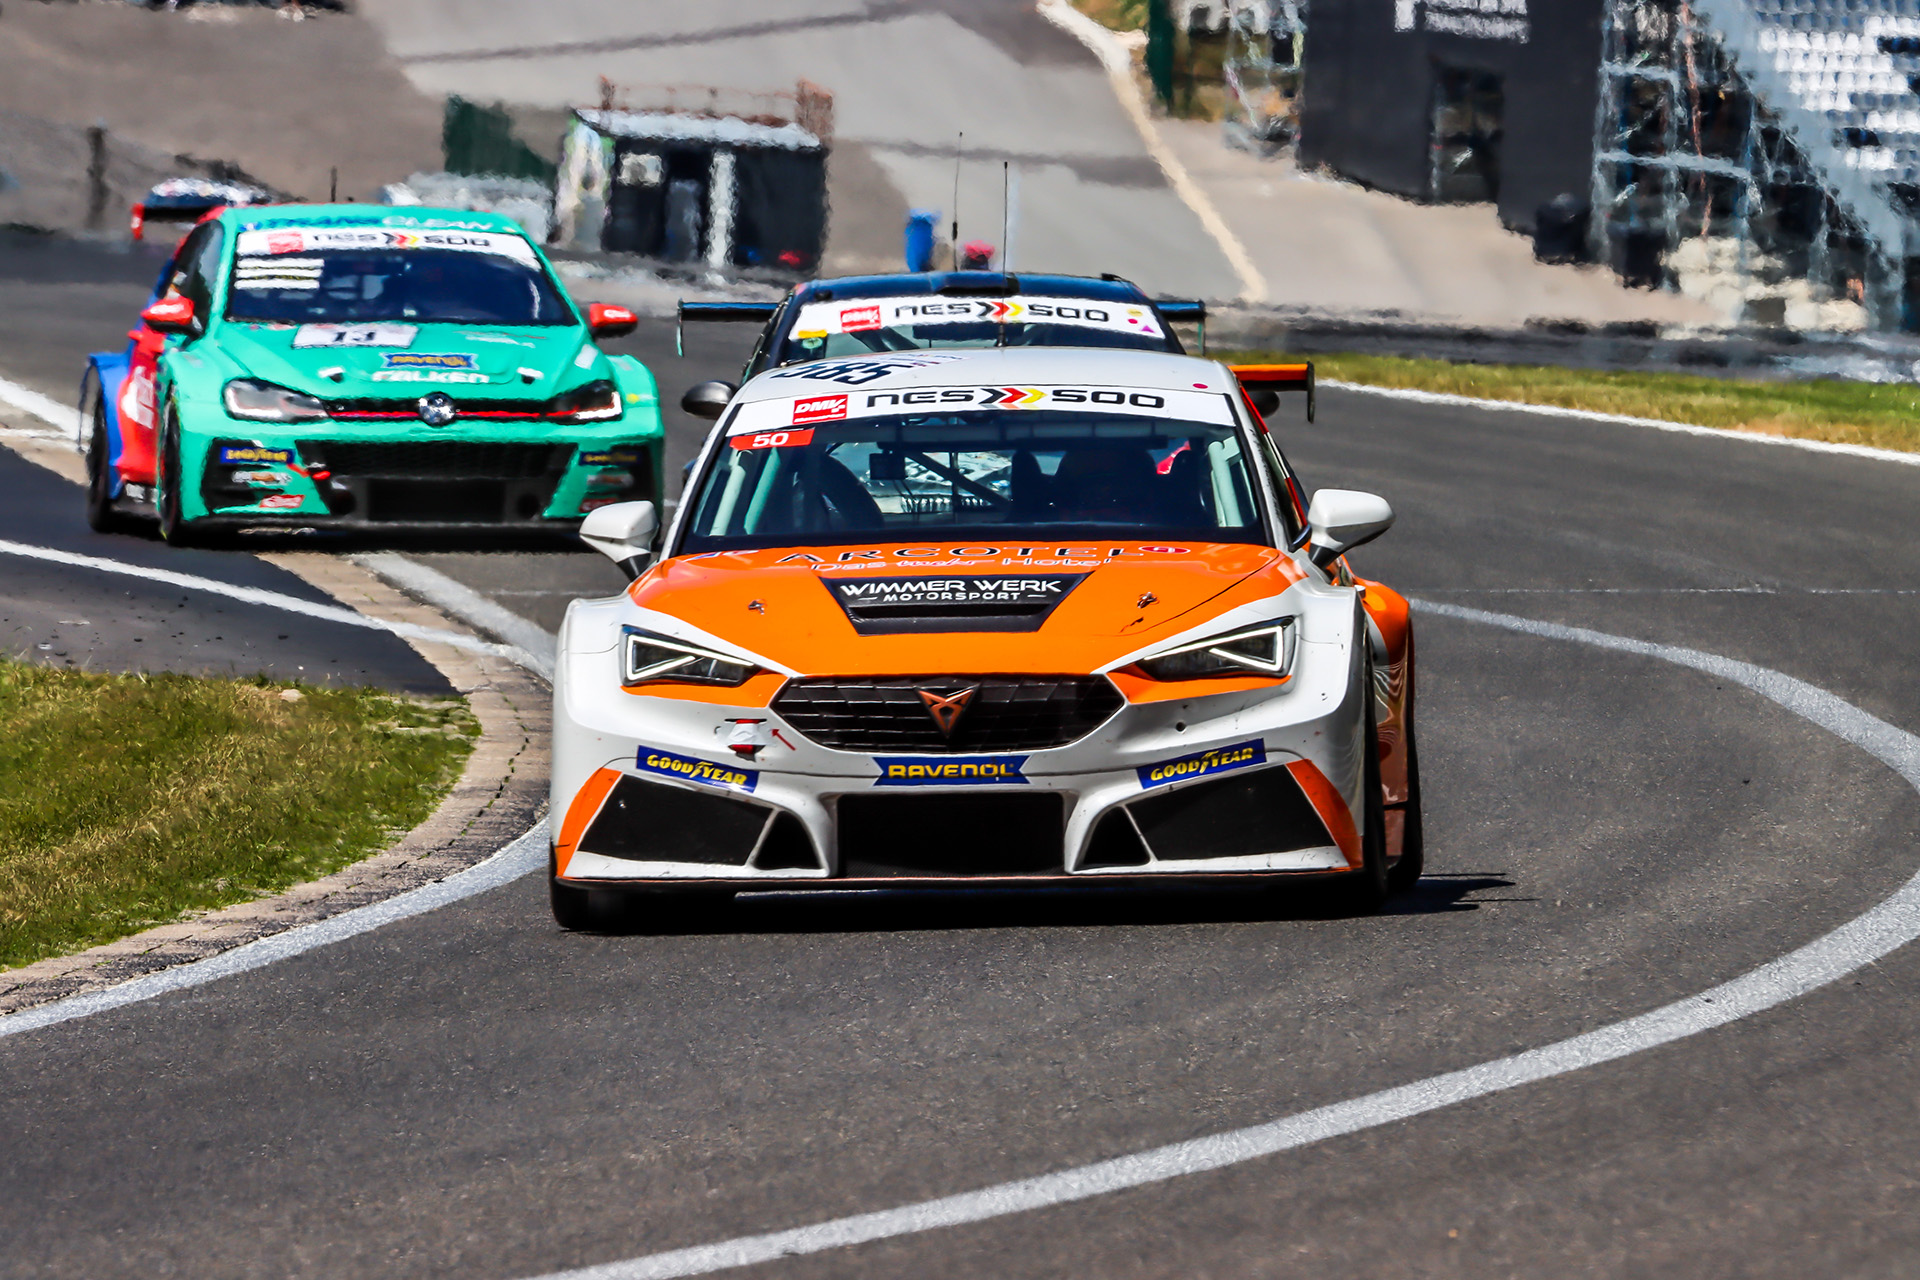 Wimmer Werk Motorsport is another new team in TCR Eastern Europe